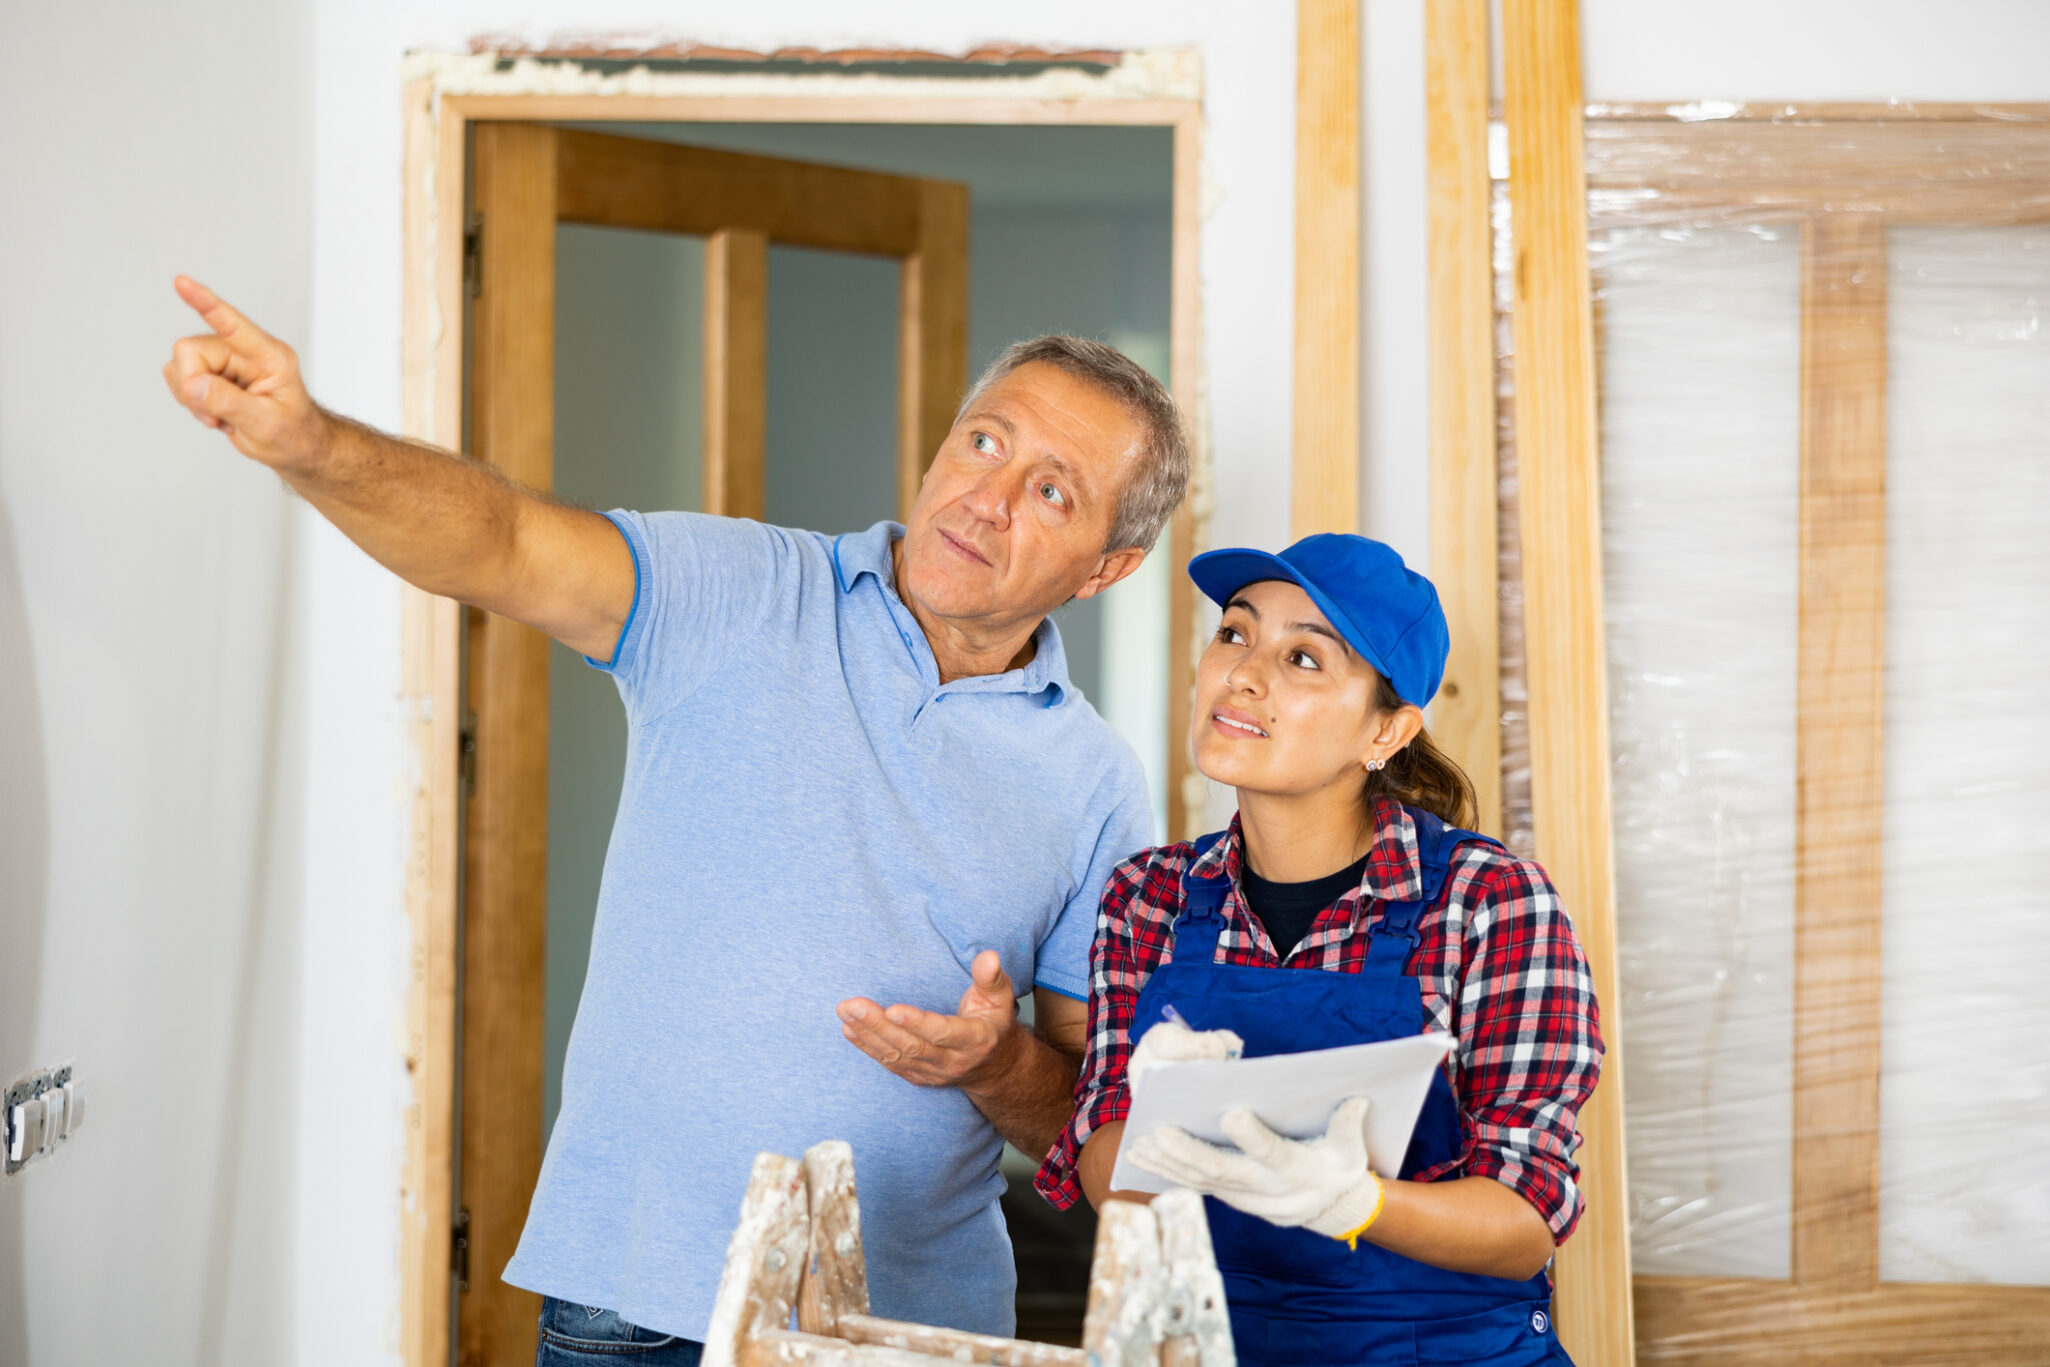 A man outstretches his arm, pointing into the distance while talking with a home construction team member who is helping build or remodel the home